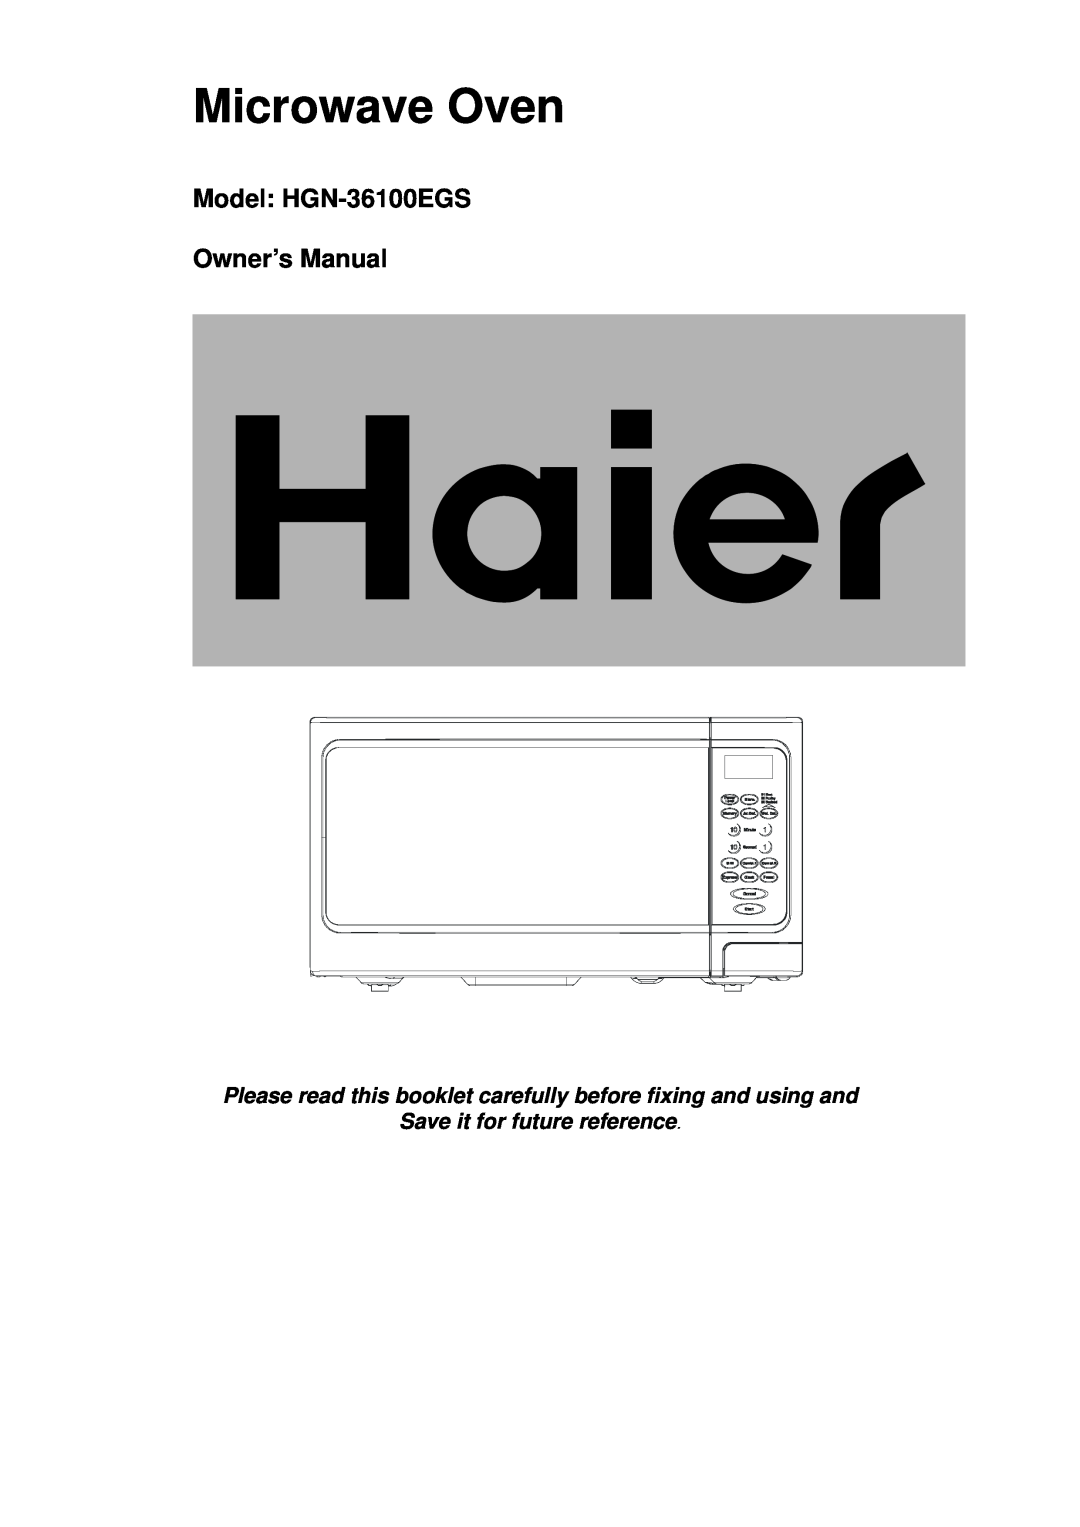 Haier HGN-36100EGS owner manual Microwave Oven, Save it for future reference 